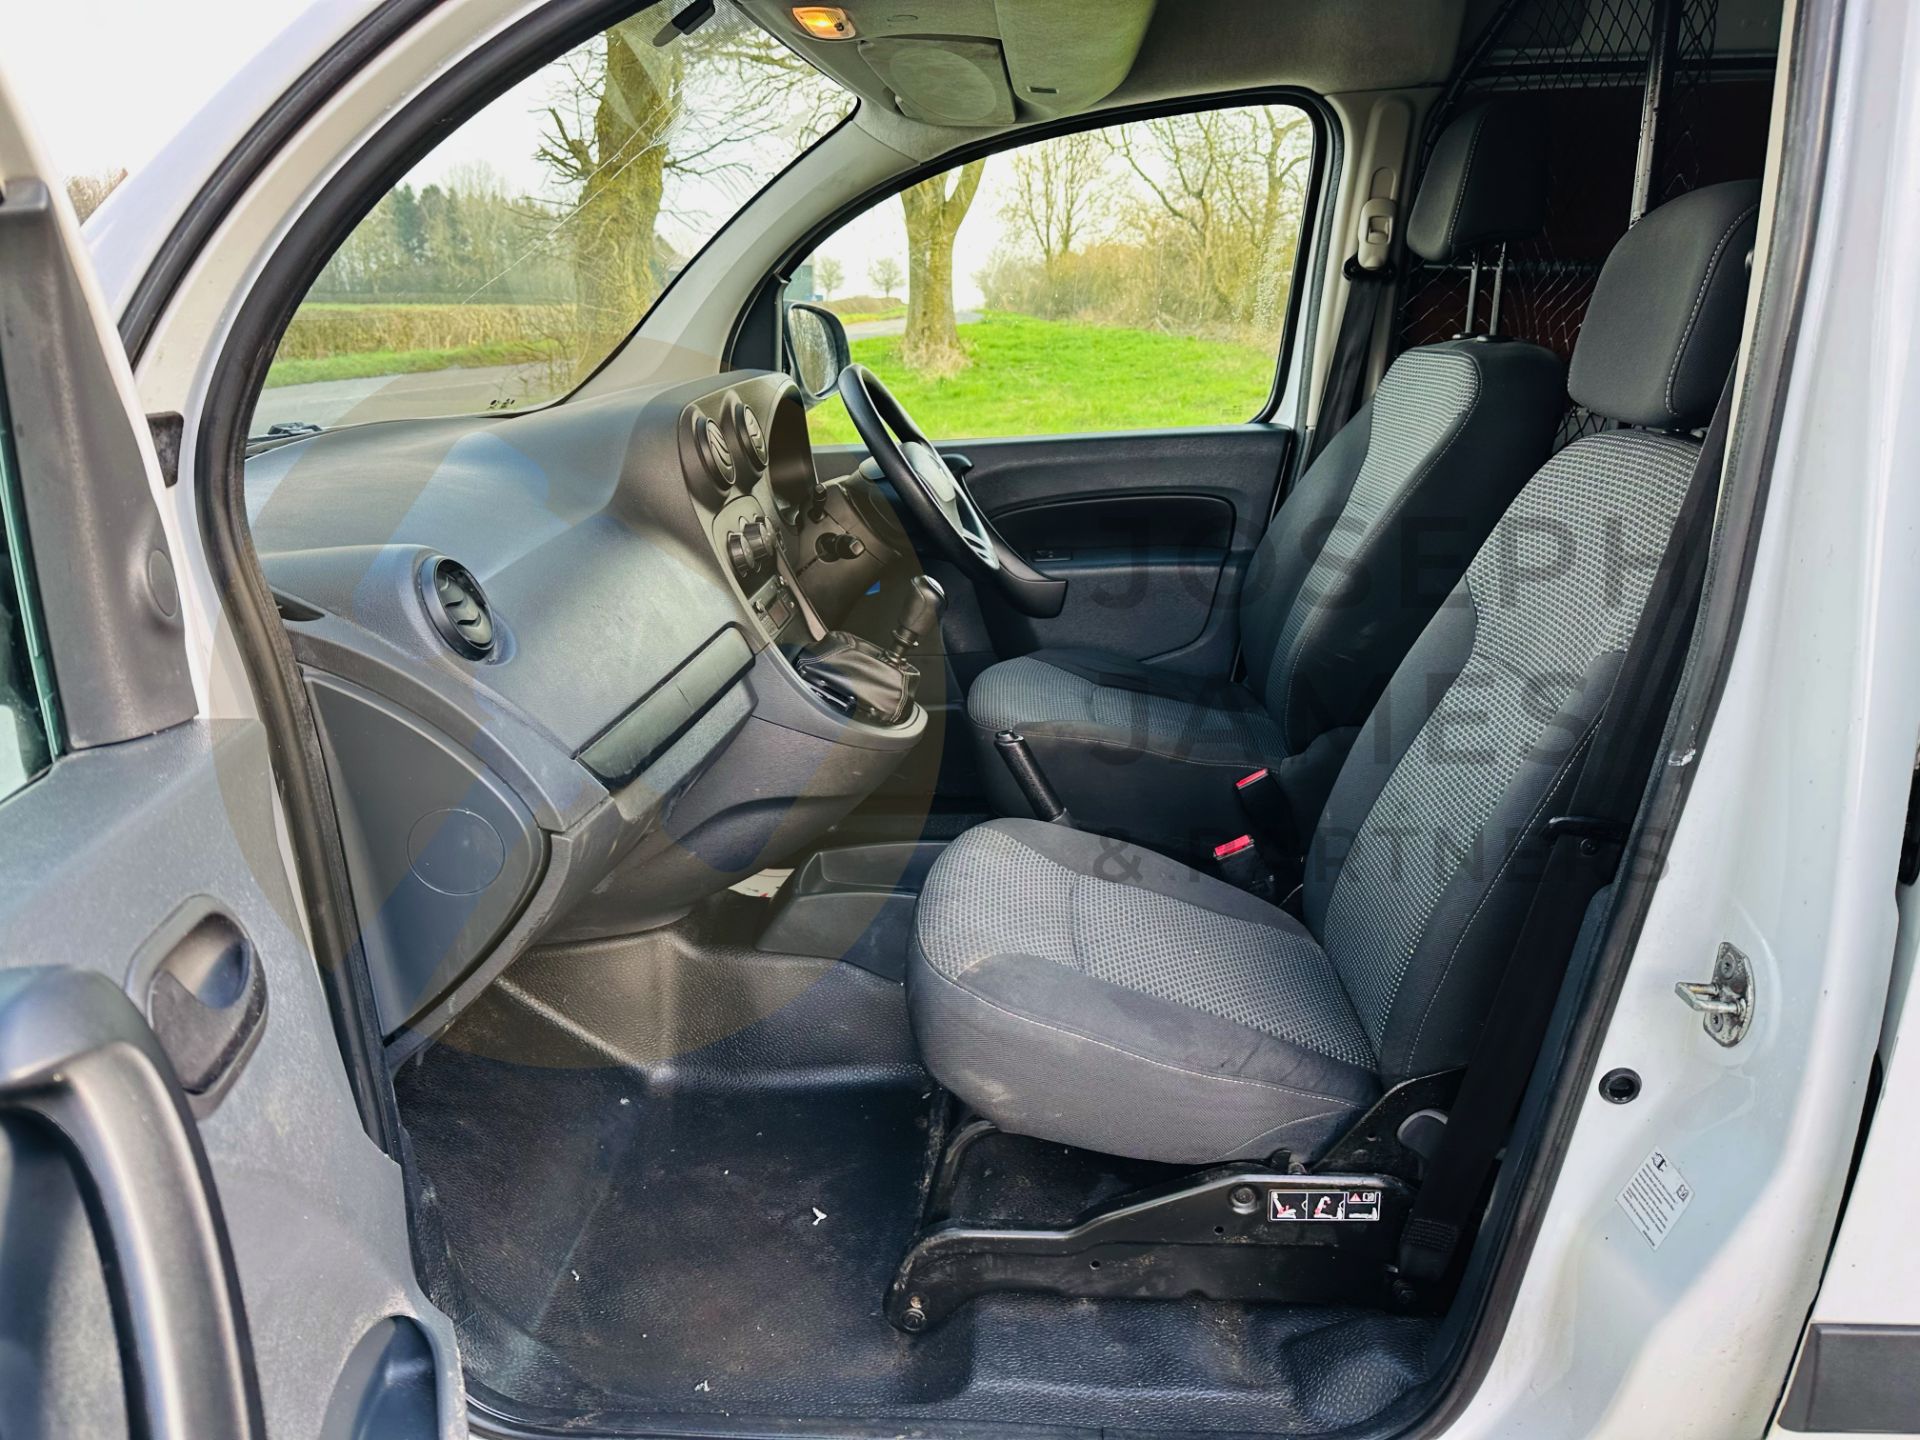 (On Sale) MERCEDES CITAN 111CDI "LWB" 2019 MODEL - AIR CON - EURO 6 - ELECTRIC PACK - NO VAT!!! - Image 15 of 28